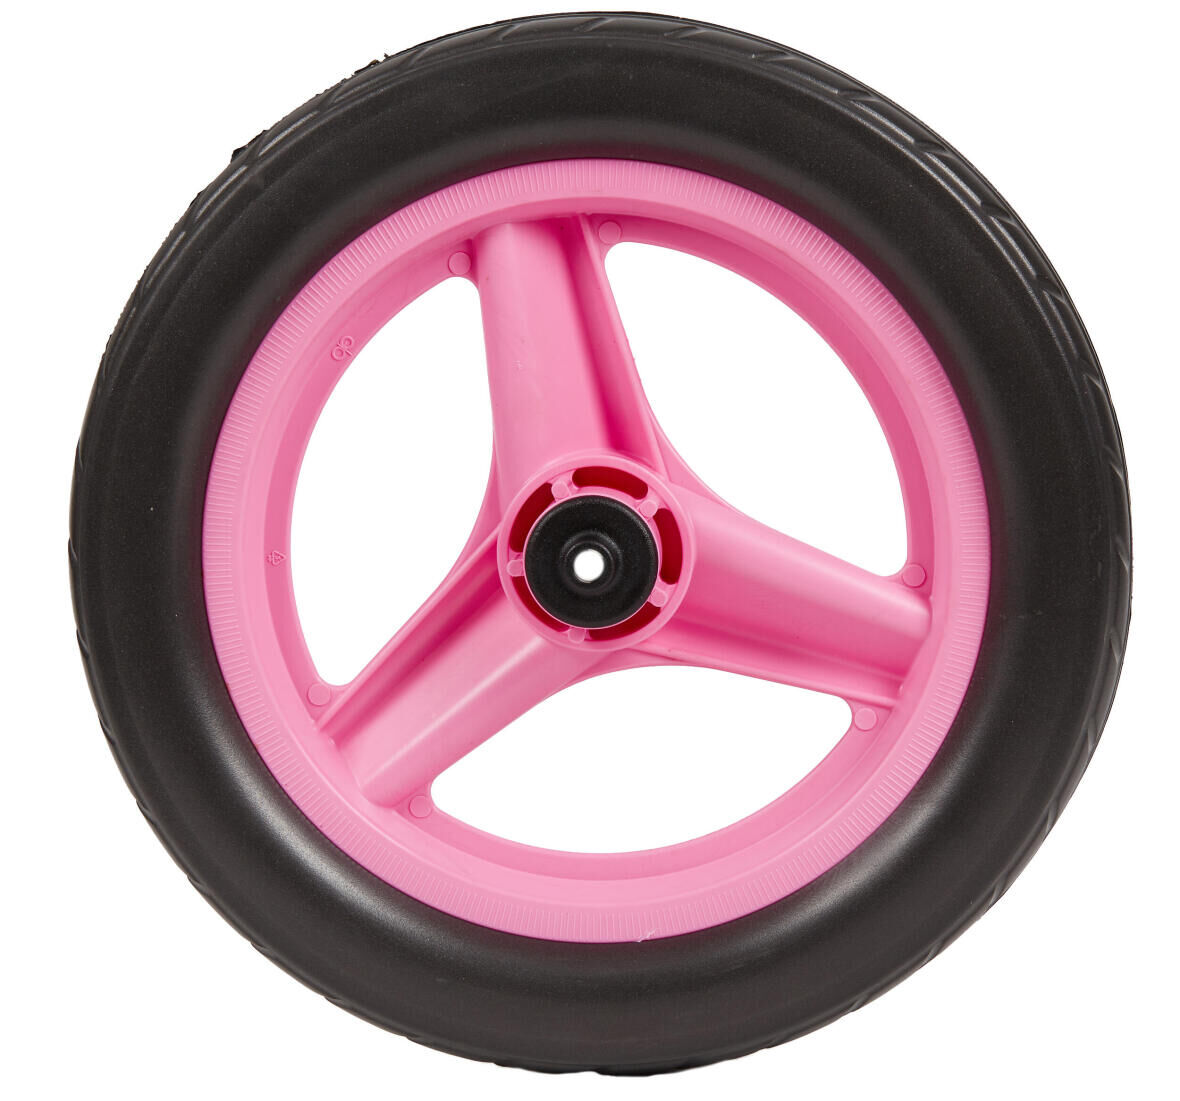 I NEED TO CHANGE THE WHEEL ON A B'TWIN BALANCE BIKE How to go about it?